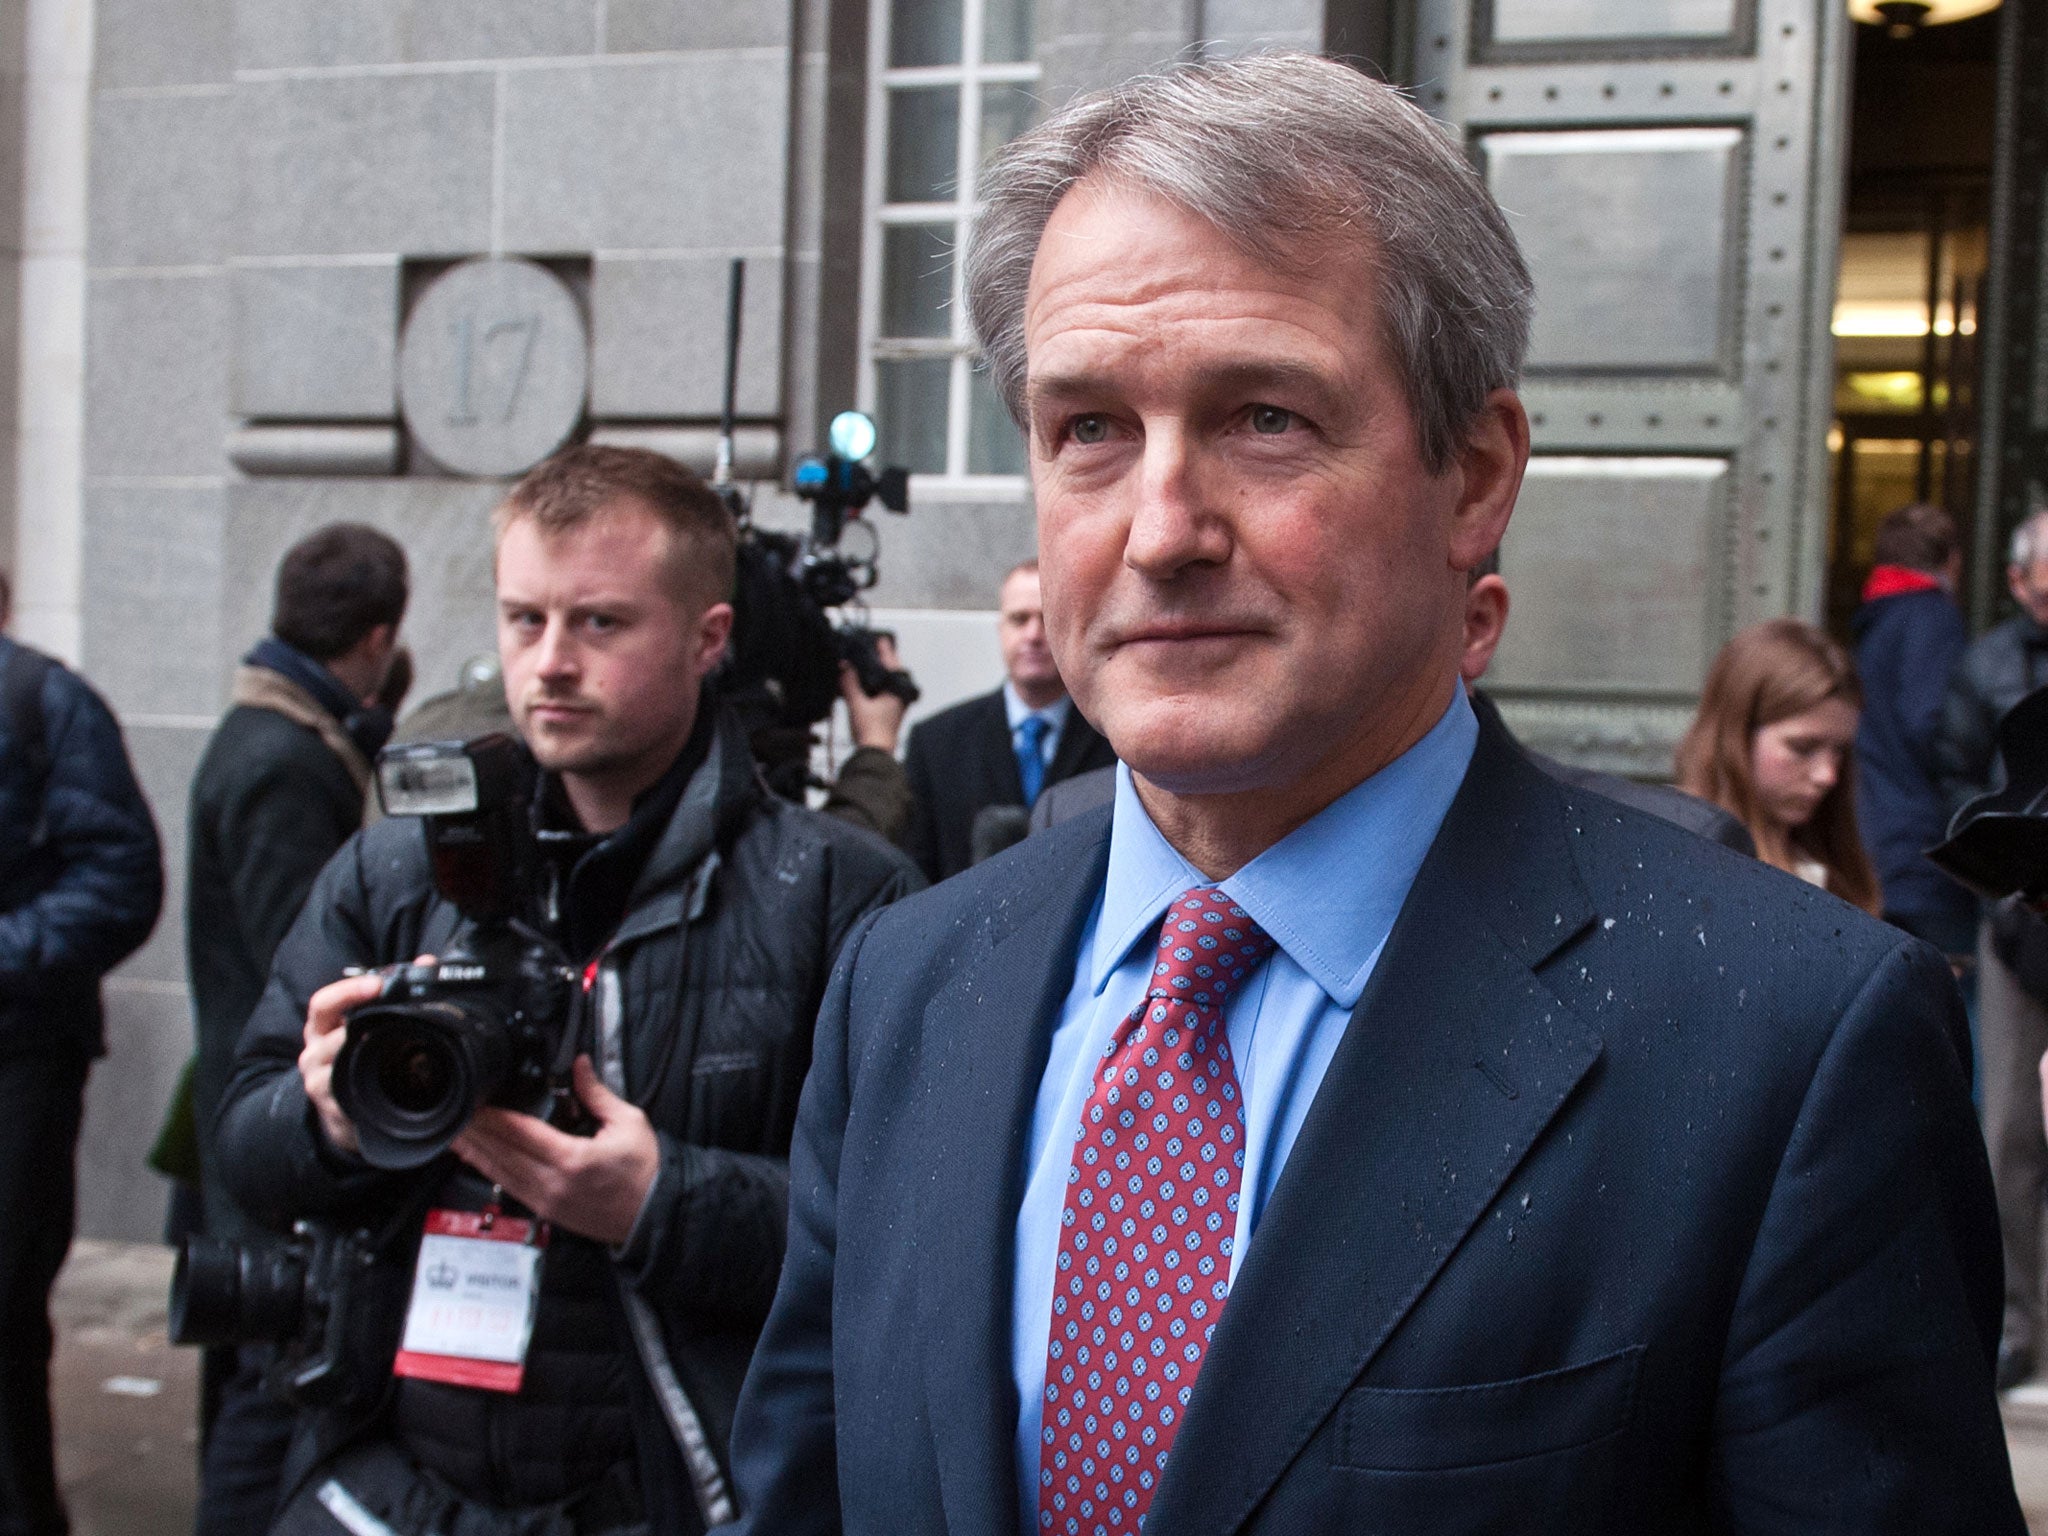 Environmental groups have launched a ferocious attack on the Tory former minister Owen Paterson after he used his new freedom from office to label them a 'green blob' of 'unelected busybodies' who were damaging Britain